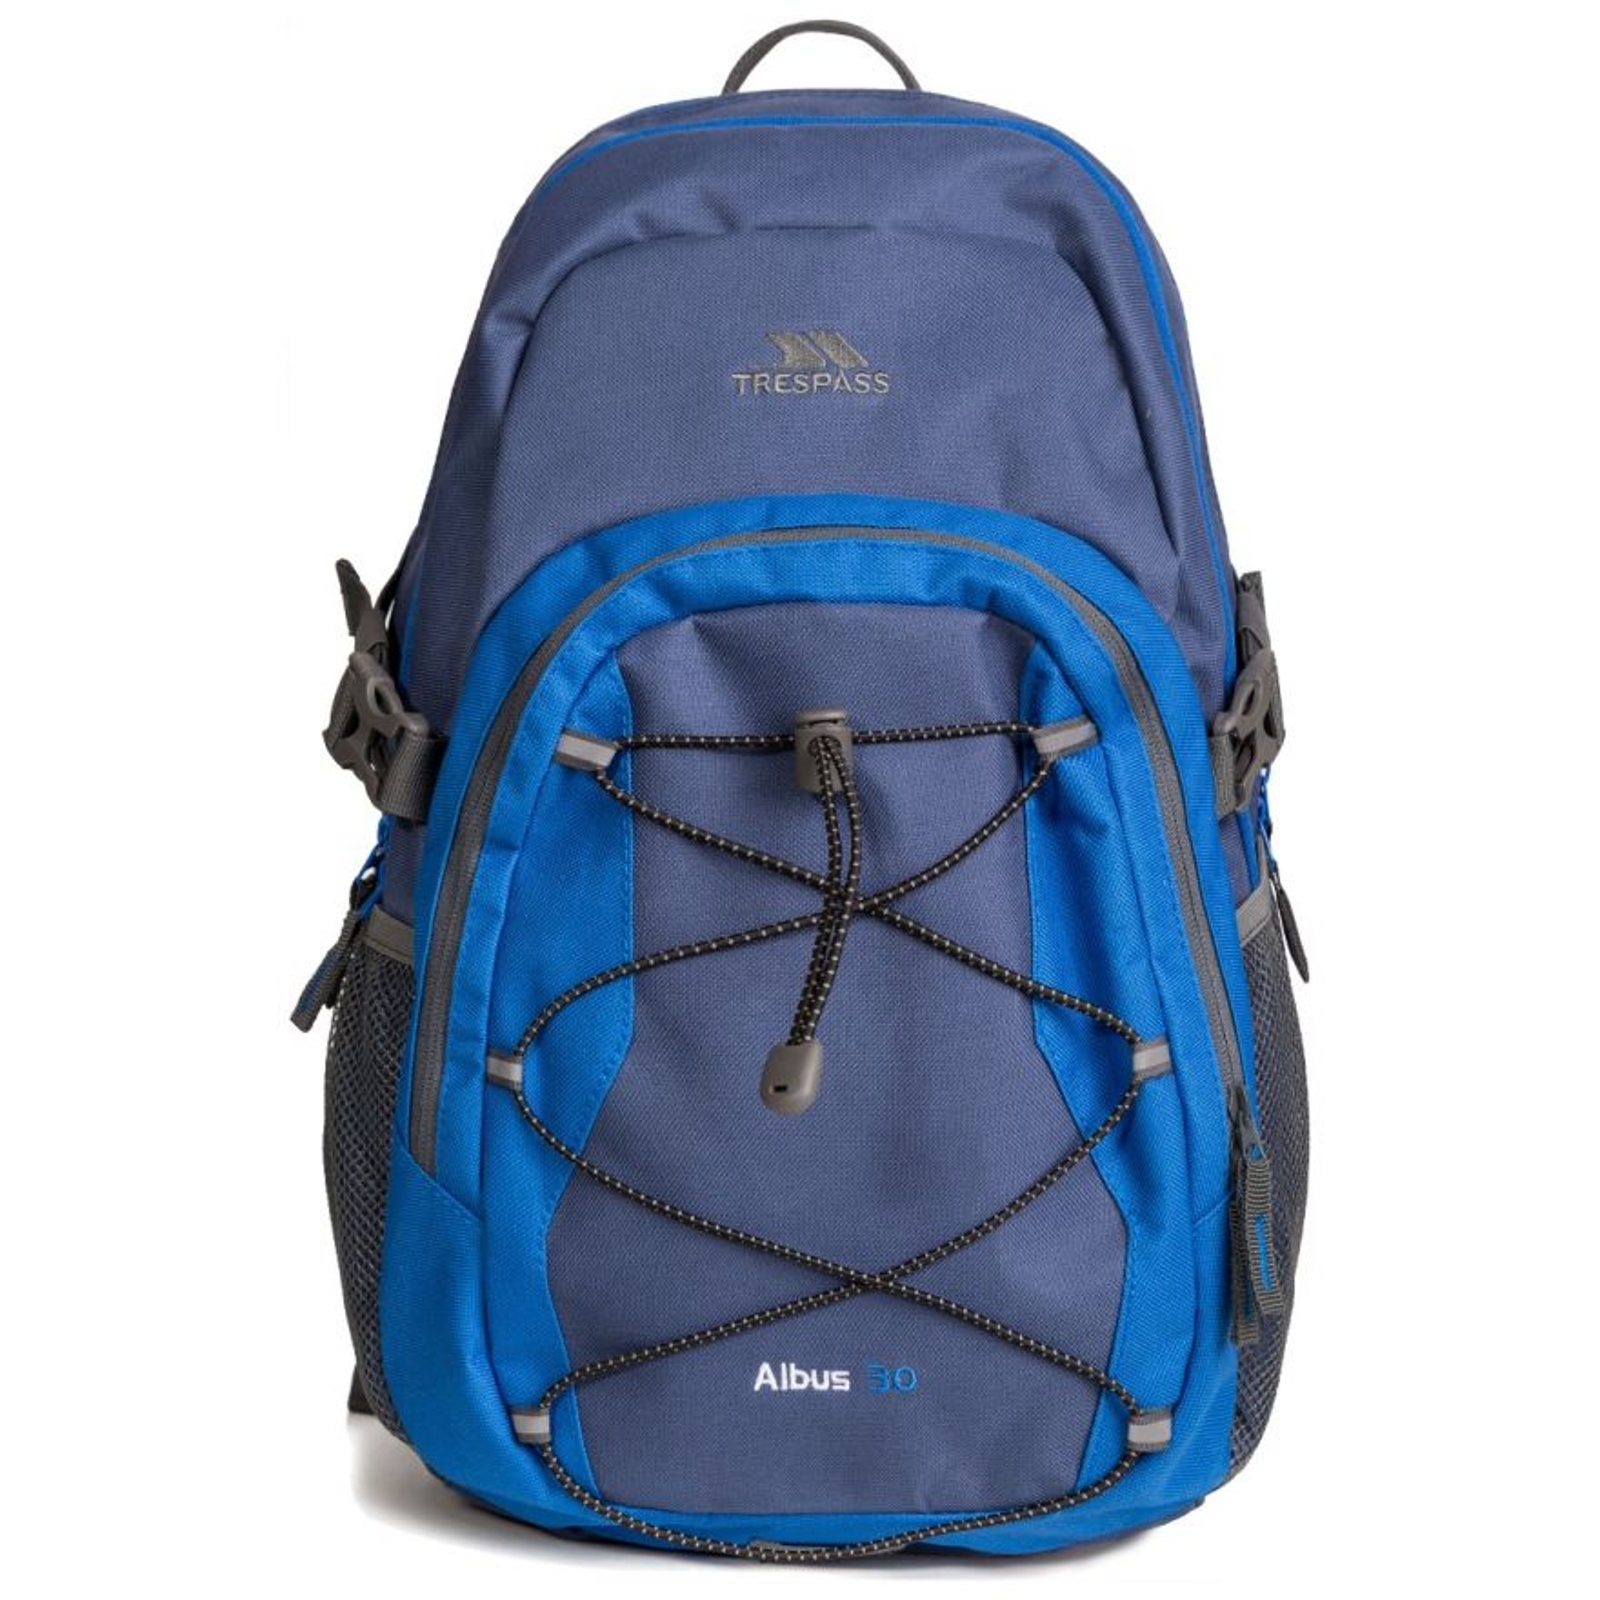 Trespass Albus 30L Backpack Electric Blue for sale online 